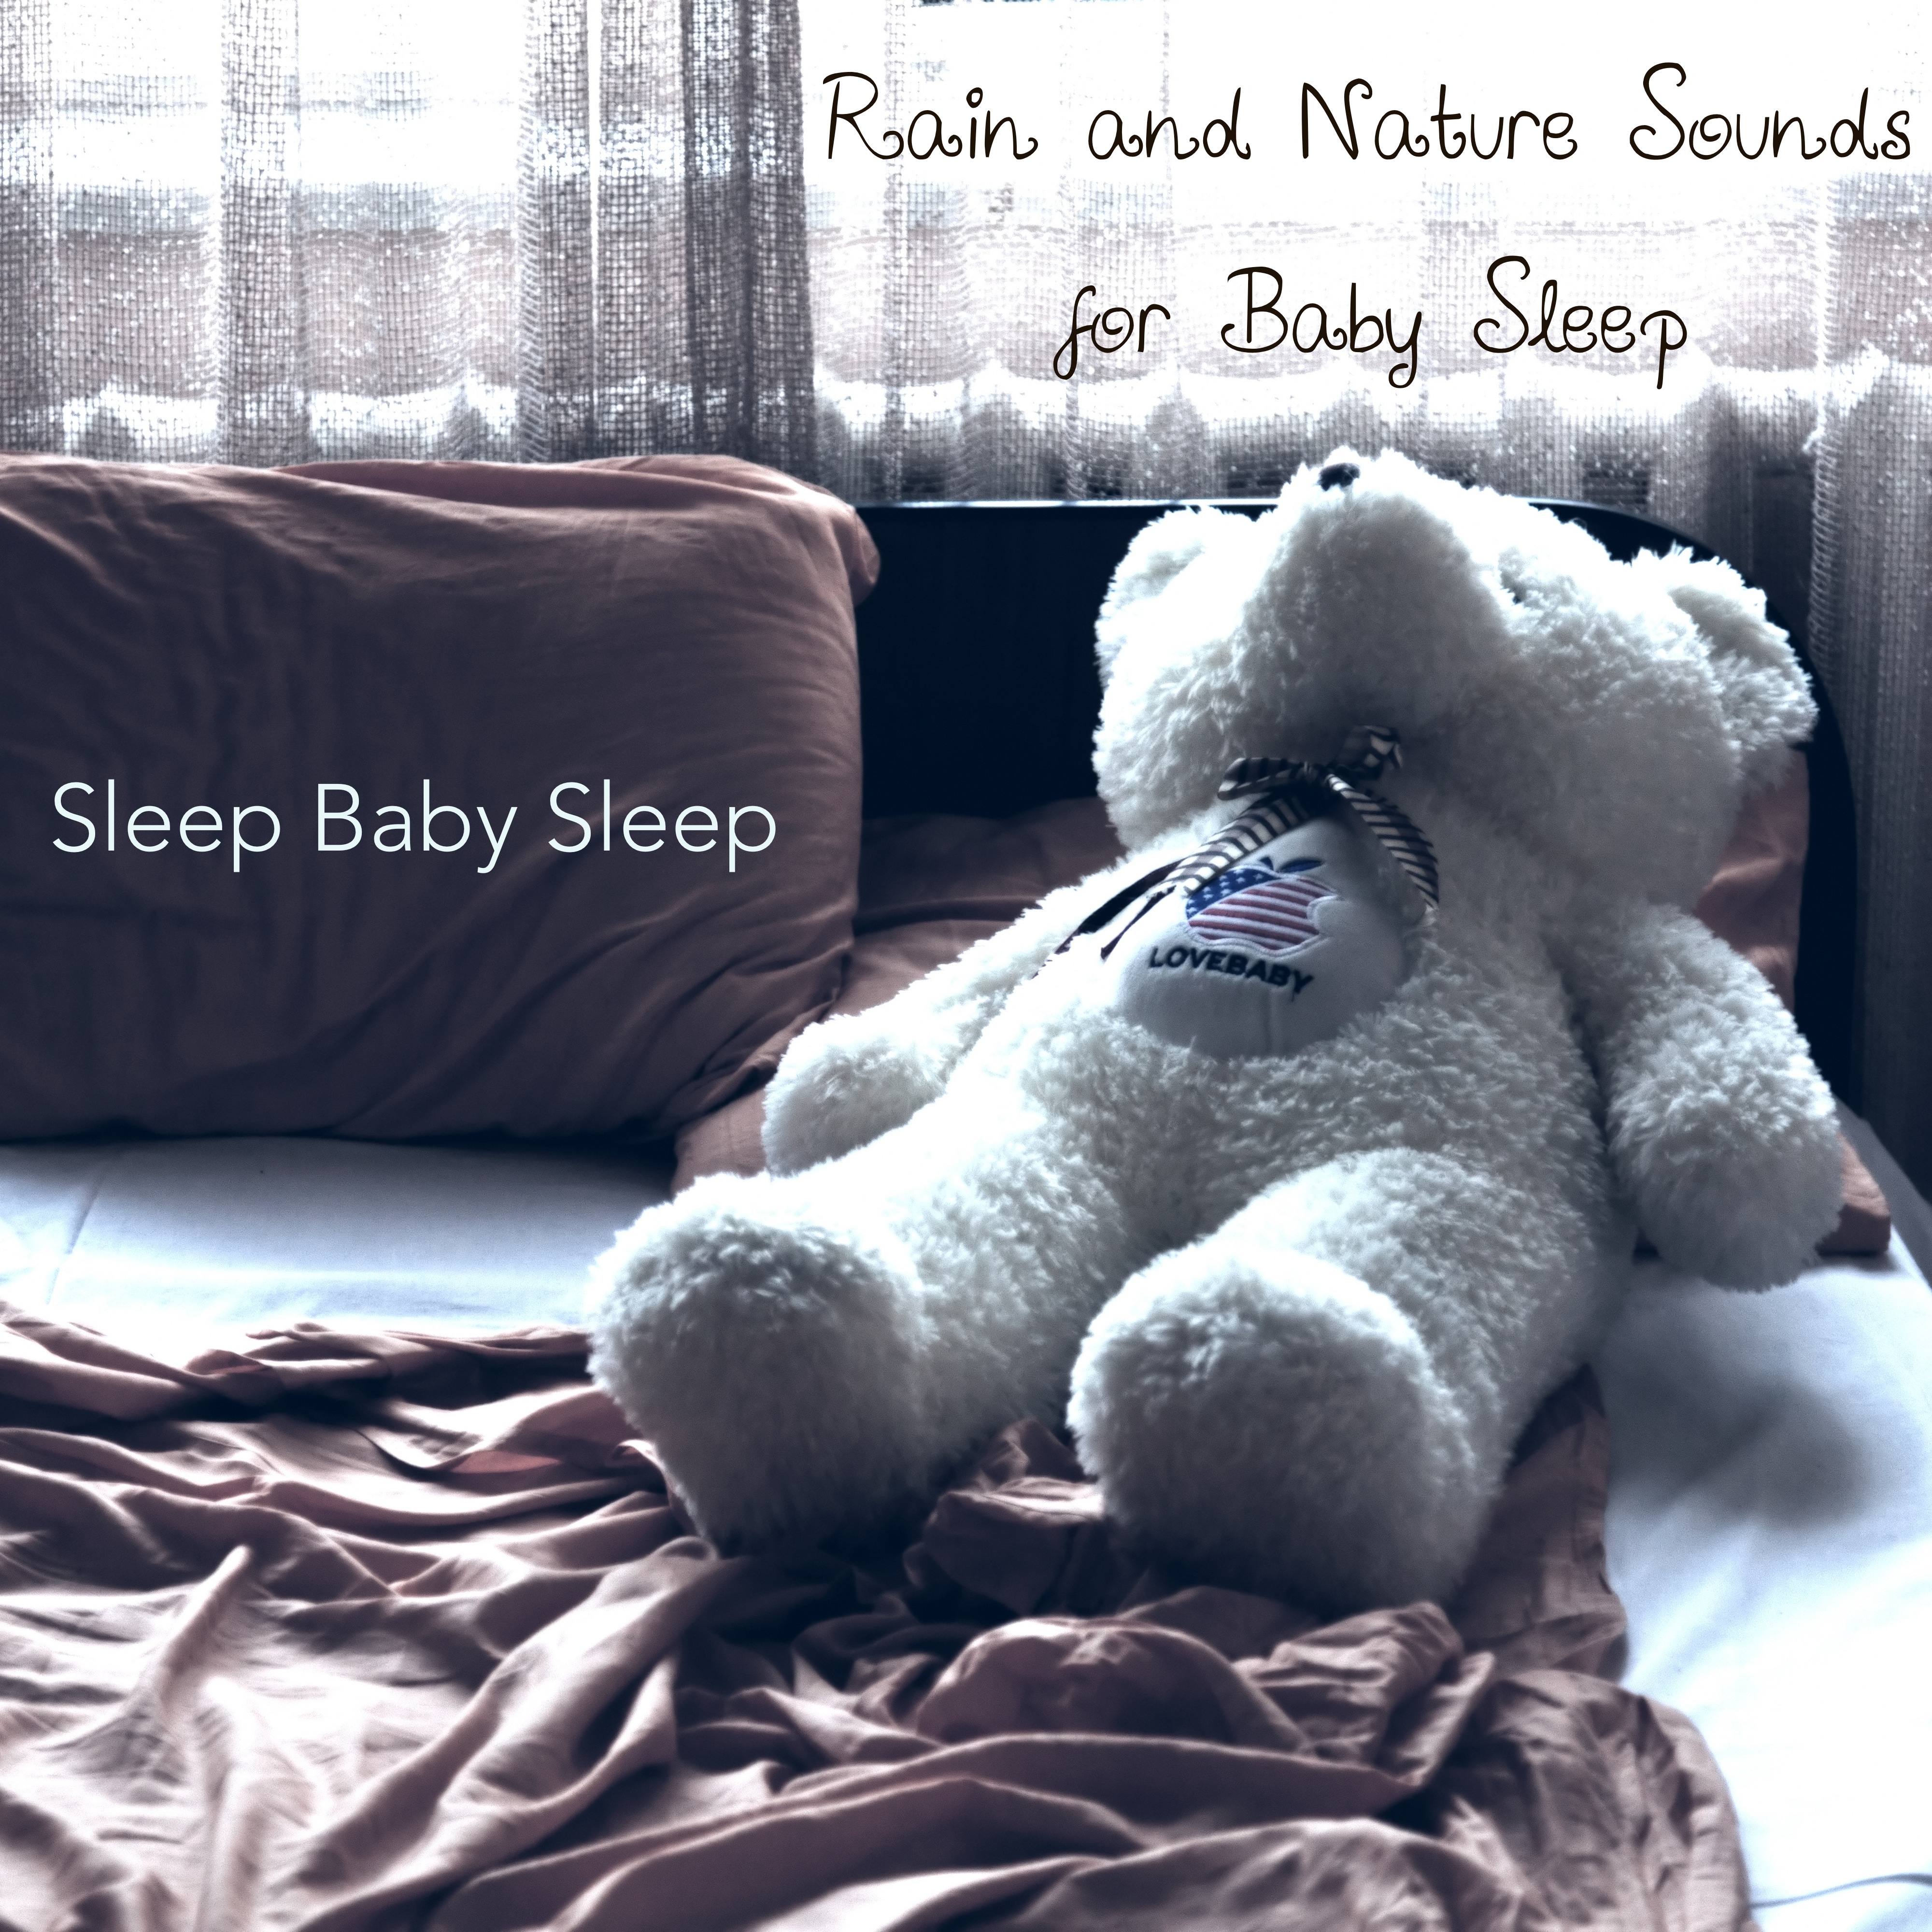 Rain and Nature Sounds for Baby Sleep, Lullaby Relaxation, Calming Relaxing Instrumental Music for Sleeping